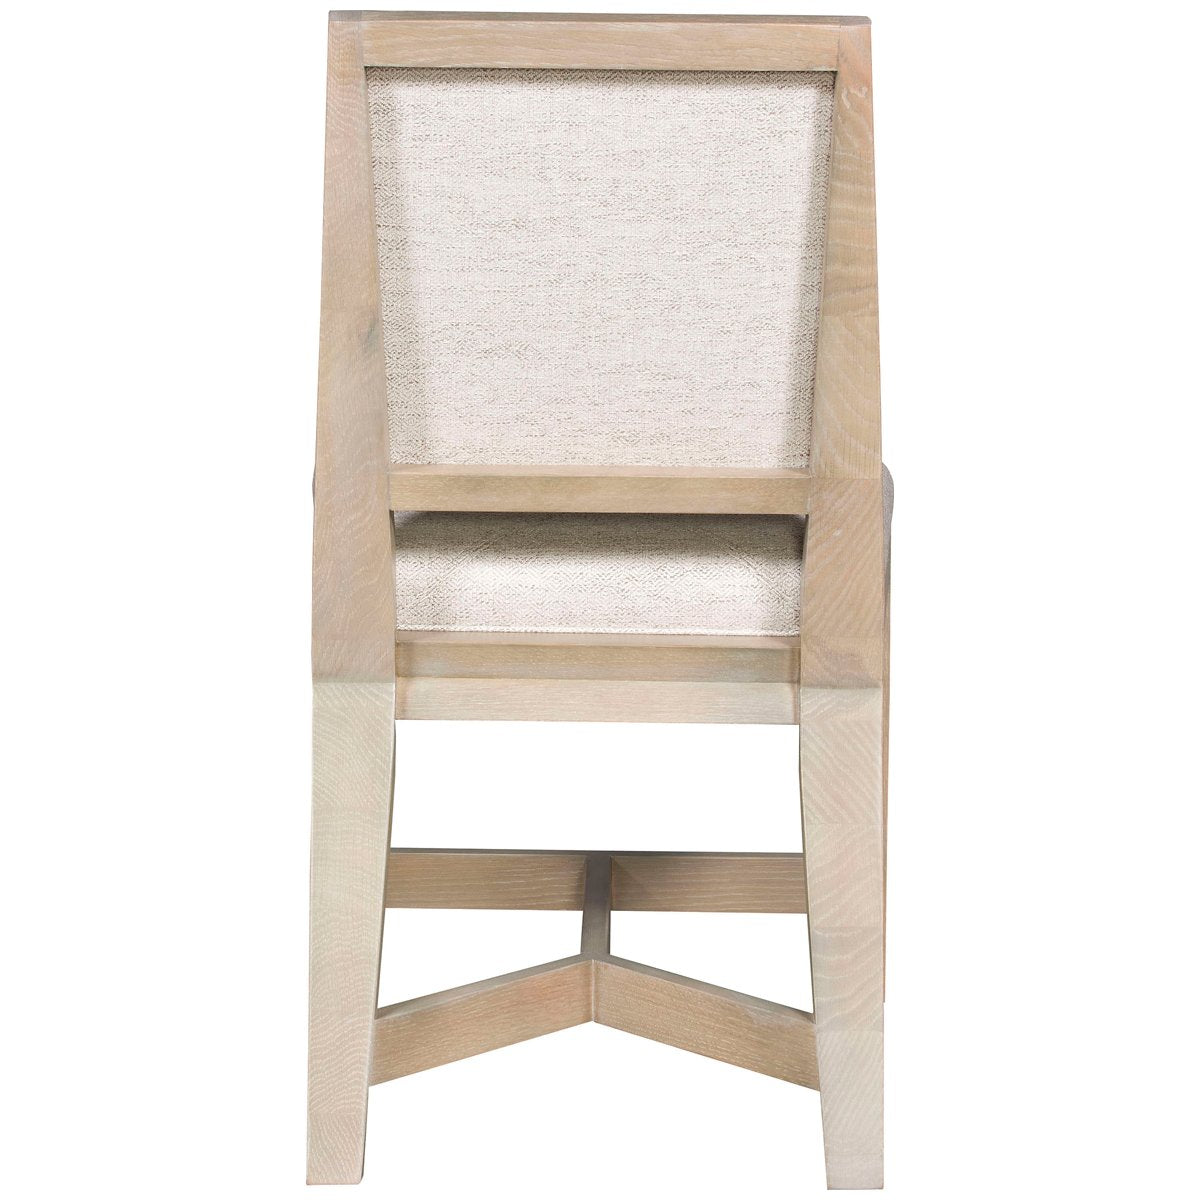 Vanguard Furniture Scoville Side Chair